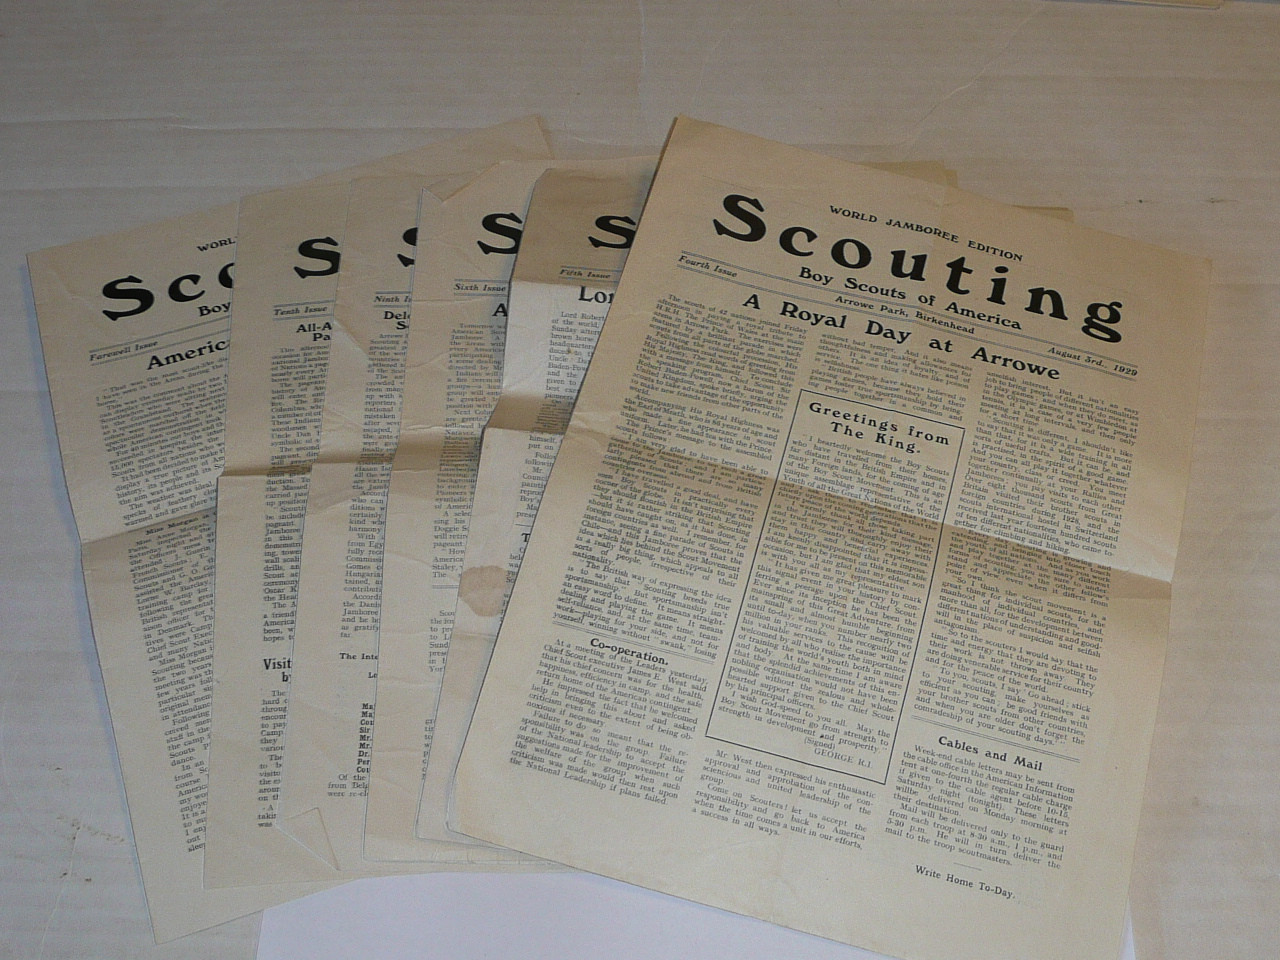 1929 World Jamboree, USA Contingent Newspaper, Scouting Magazine Special, Six of the 11 daily newspapers